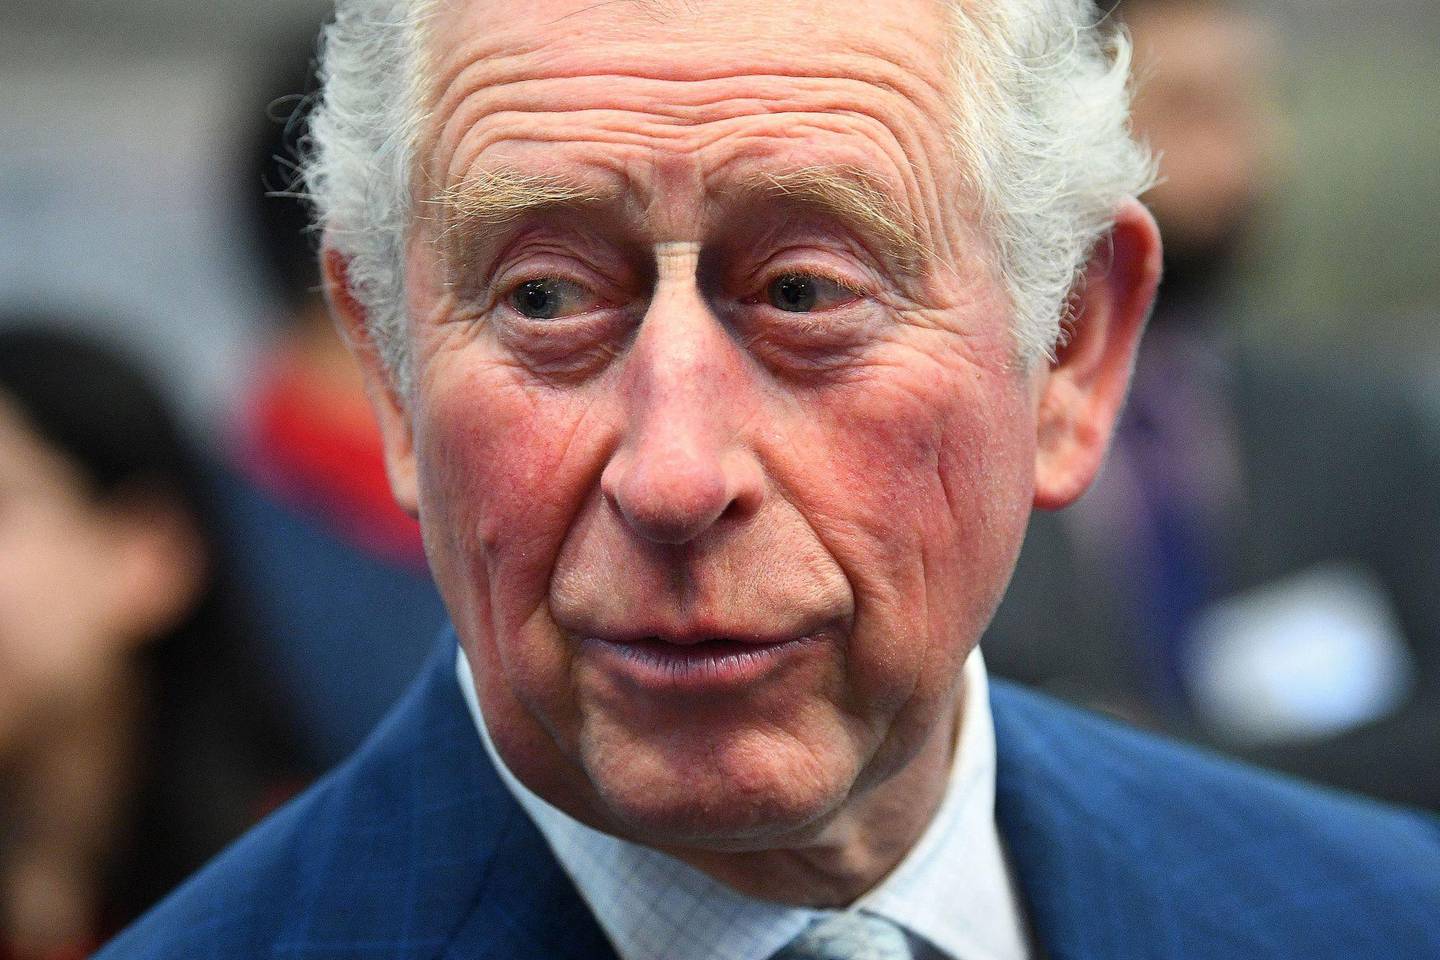 (FILES) In this file photo taken on March 04, 2020 Britain's Prince Charles, Prince of Wales reacts during his visit to the London Transport Museum in London on March 4, 2020, to take part in celebrations to mark 20 years of the museum. - Prince Charles, the eldest son and heir to Queen Elizabeth II, has tested positive for the new coronavirus, his office said on March 25, 2020. The 71-year-old is displaying mild symptoms of COVID-19 "but otherwise remains in good health", Clarence House said in a statement. (Photo by Victoria Jones / POOL / AFP)